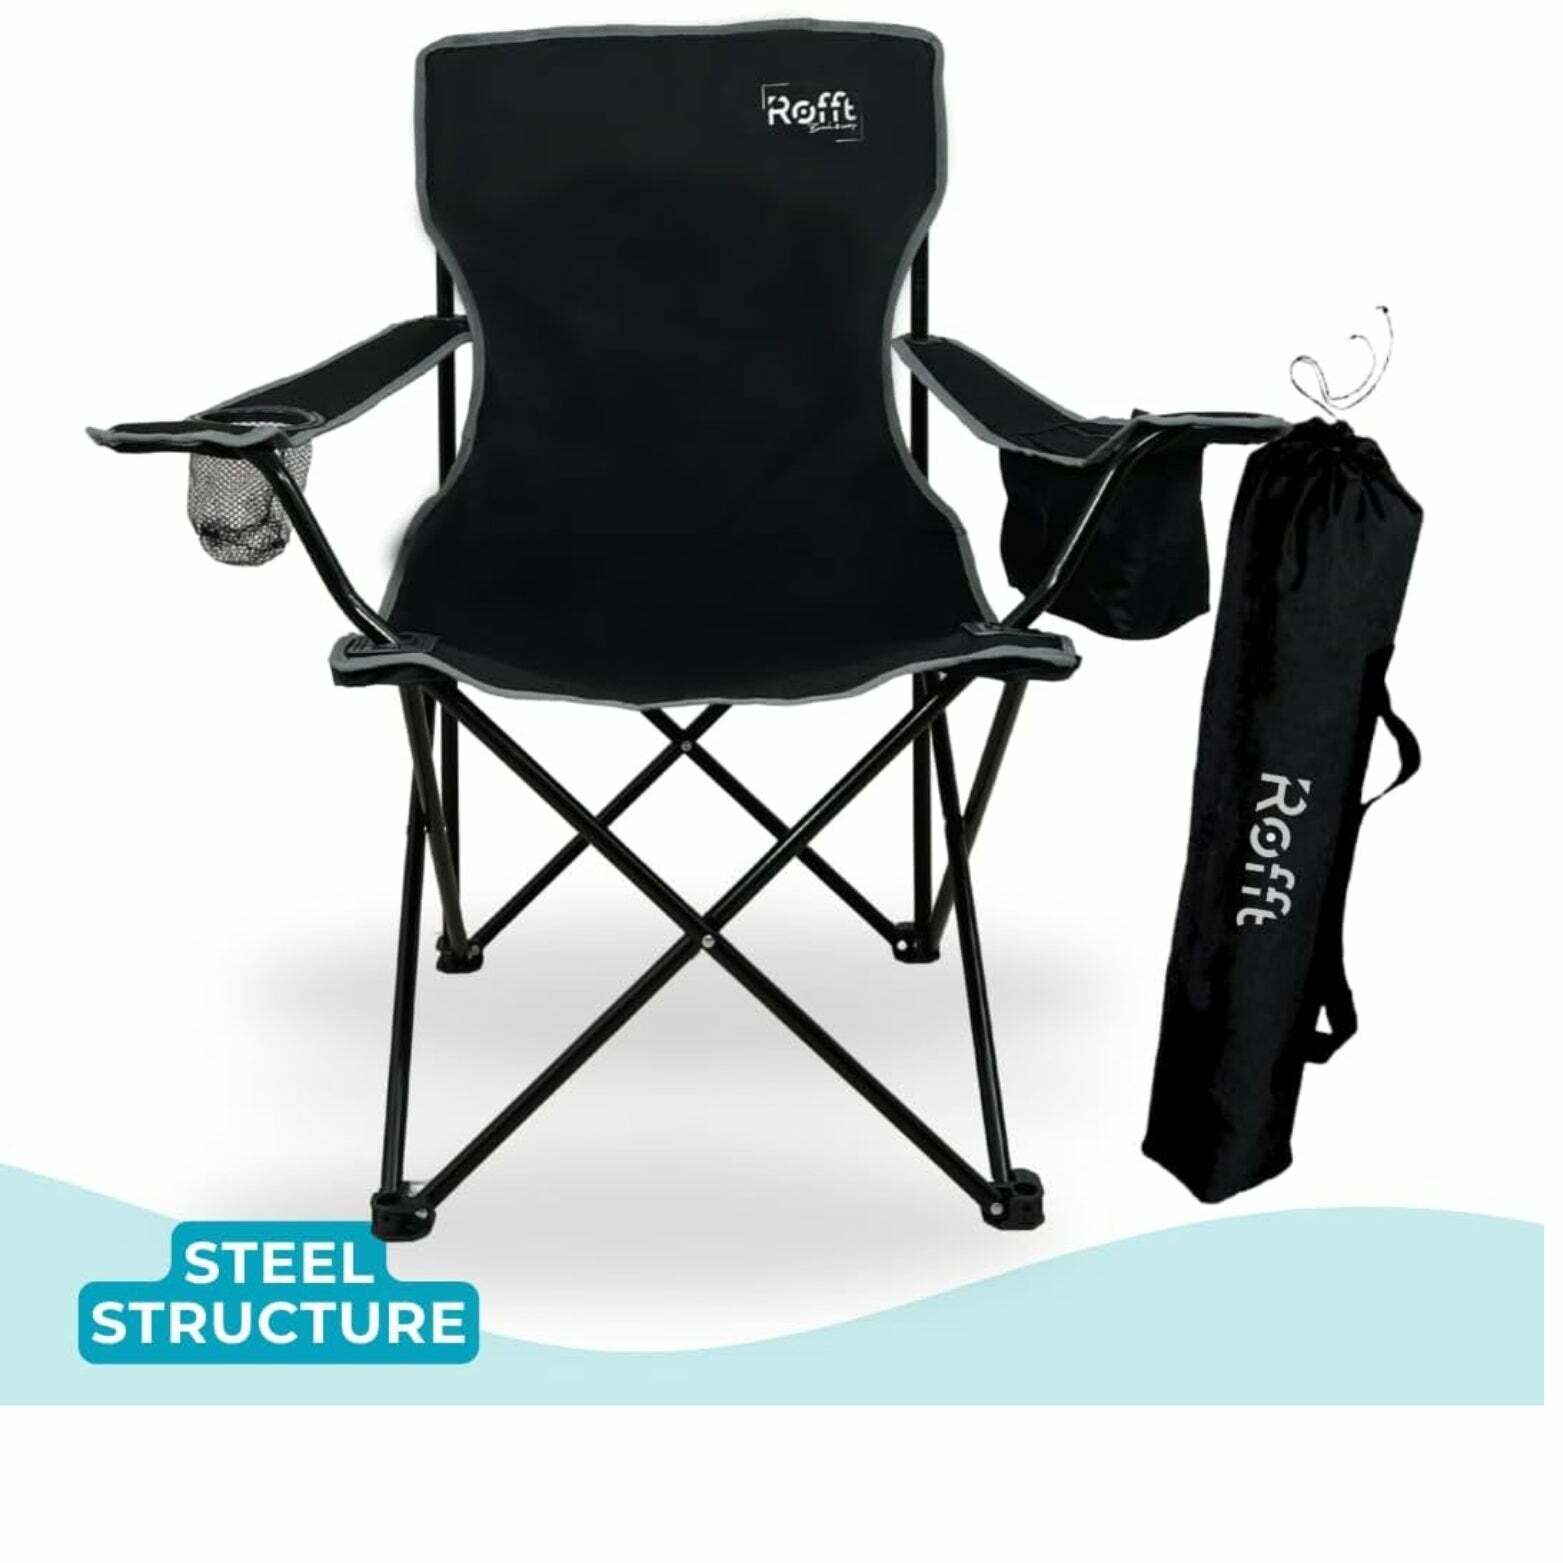 ROFFT Portable Camping Chair - Cooler Pocket, Cup Holder, Alloy Steel Frame - Black